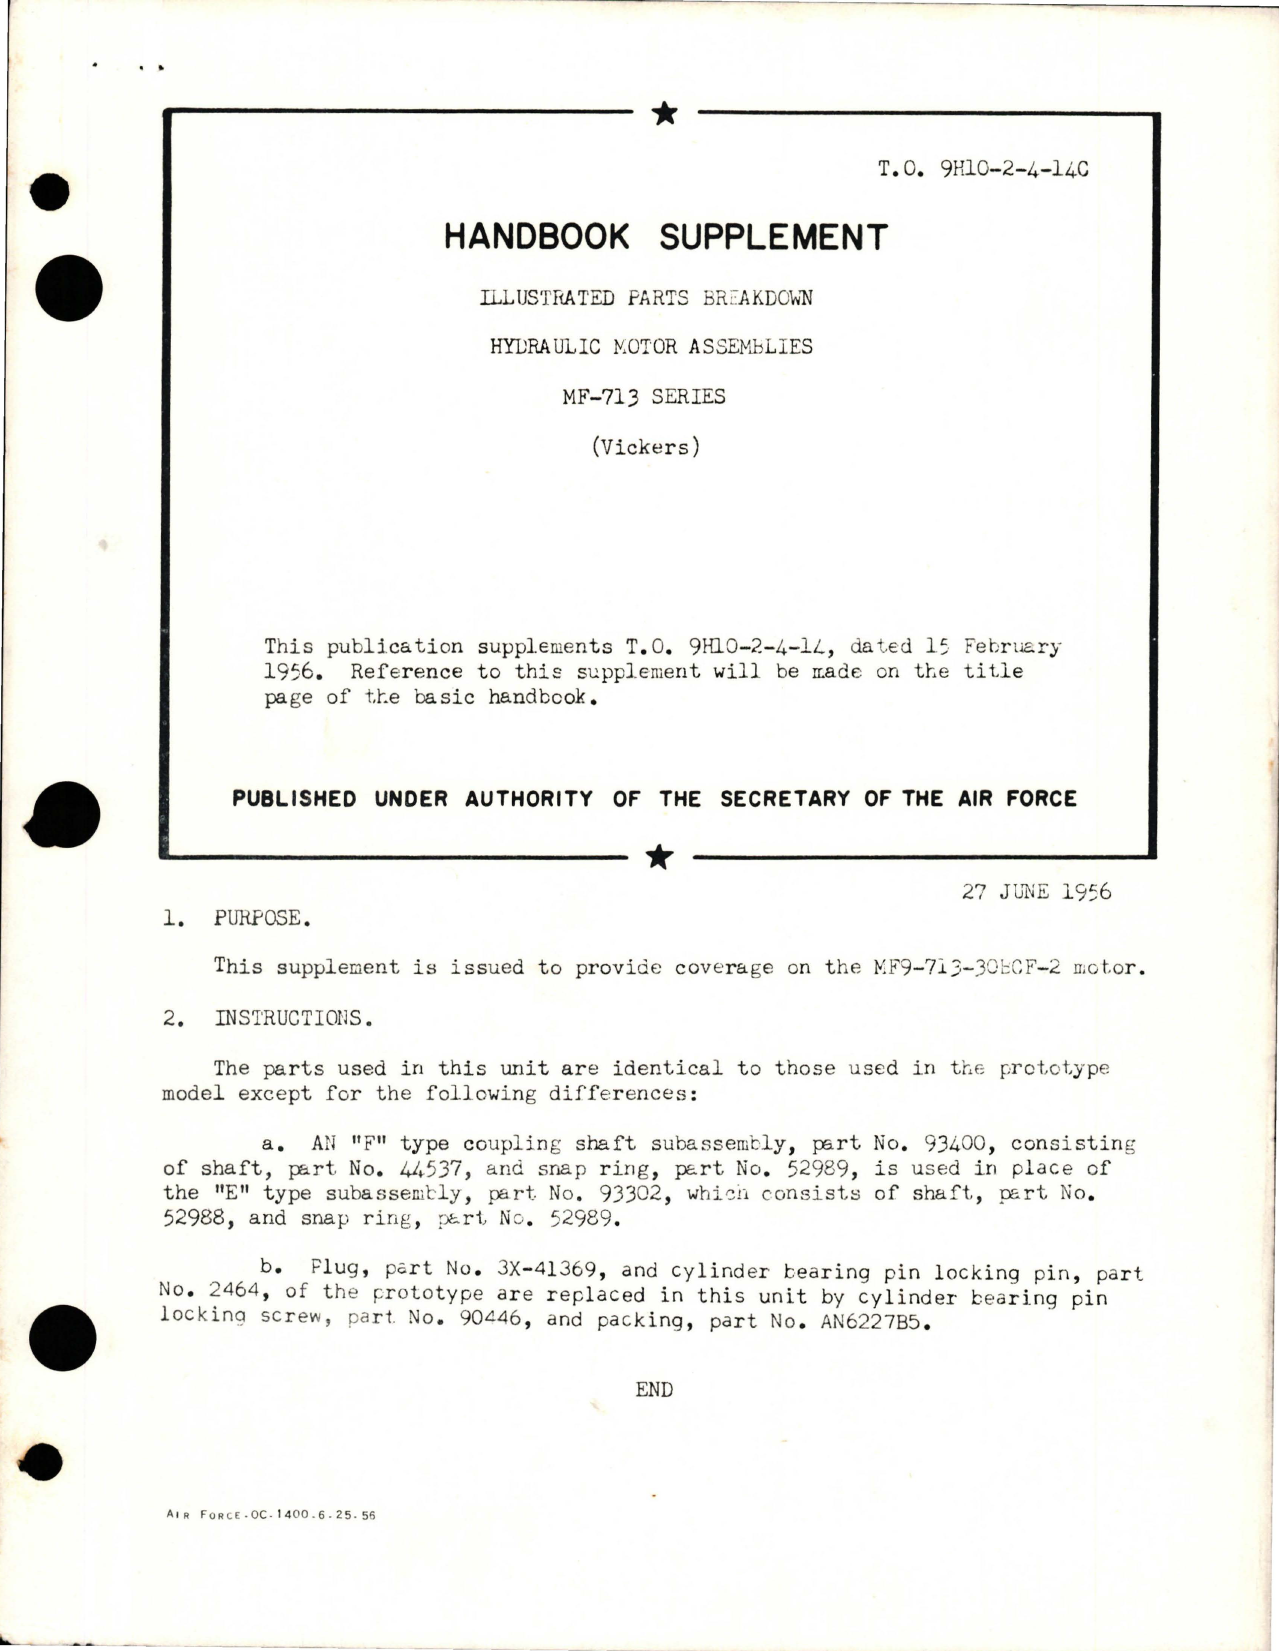 Sample page 1 from AirCorps Library document: Supplement to Illustrated Parts Breakdown for Hydraulic Motor Assemblies - MF-713 Series